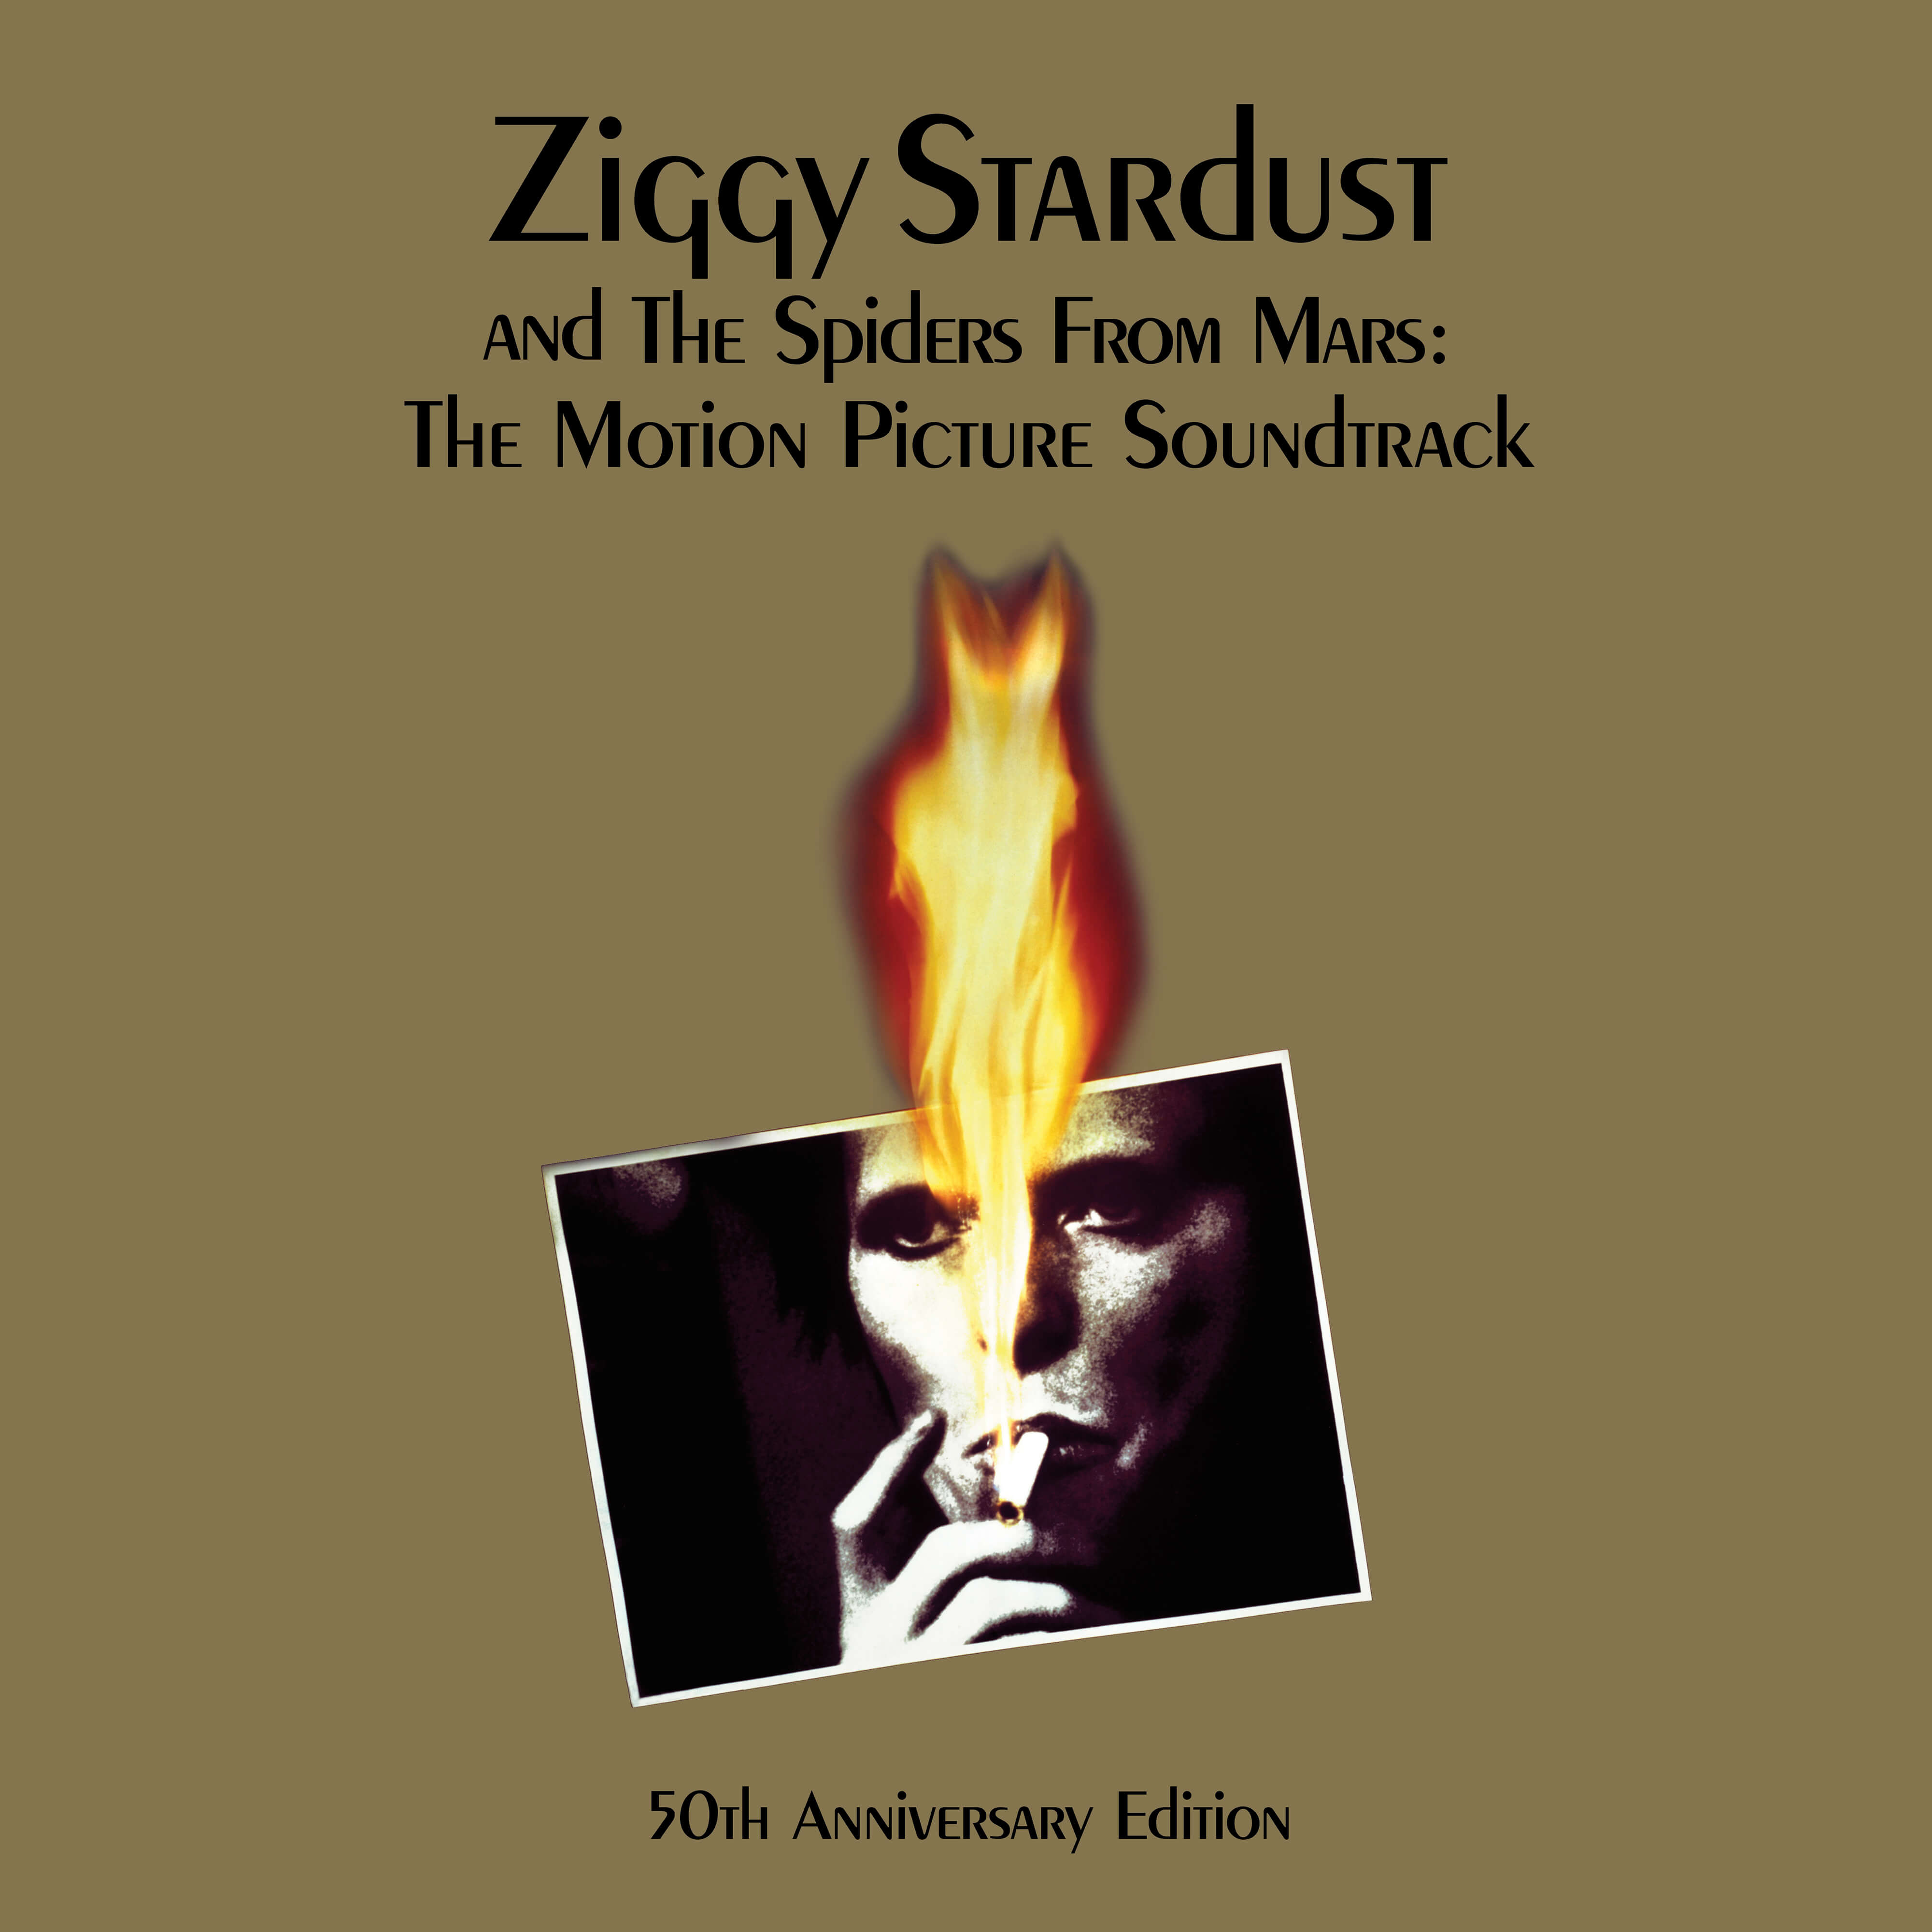 David Bowie - Ziggy Stardust And The Spiders From Mars (Anniversary)